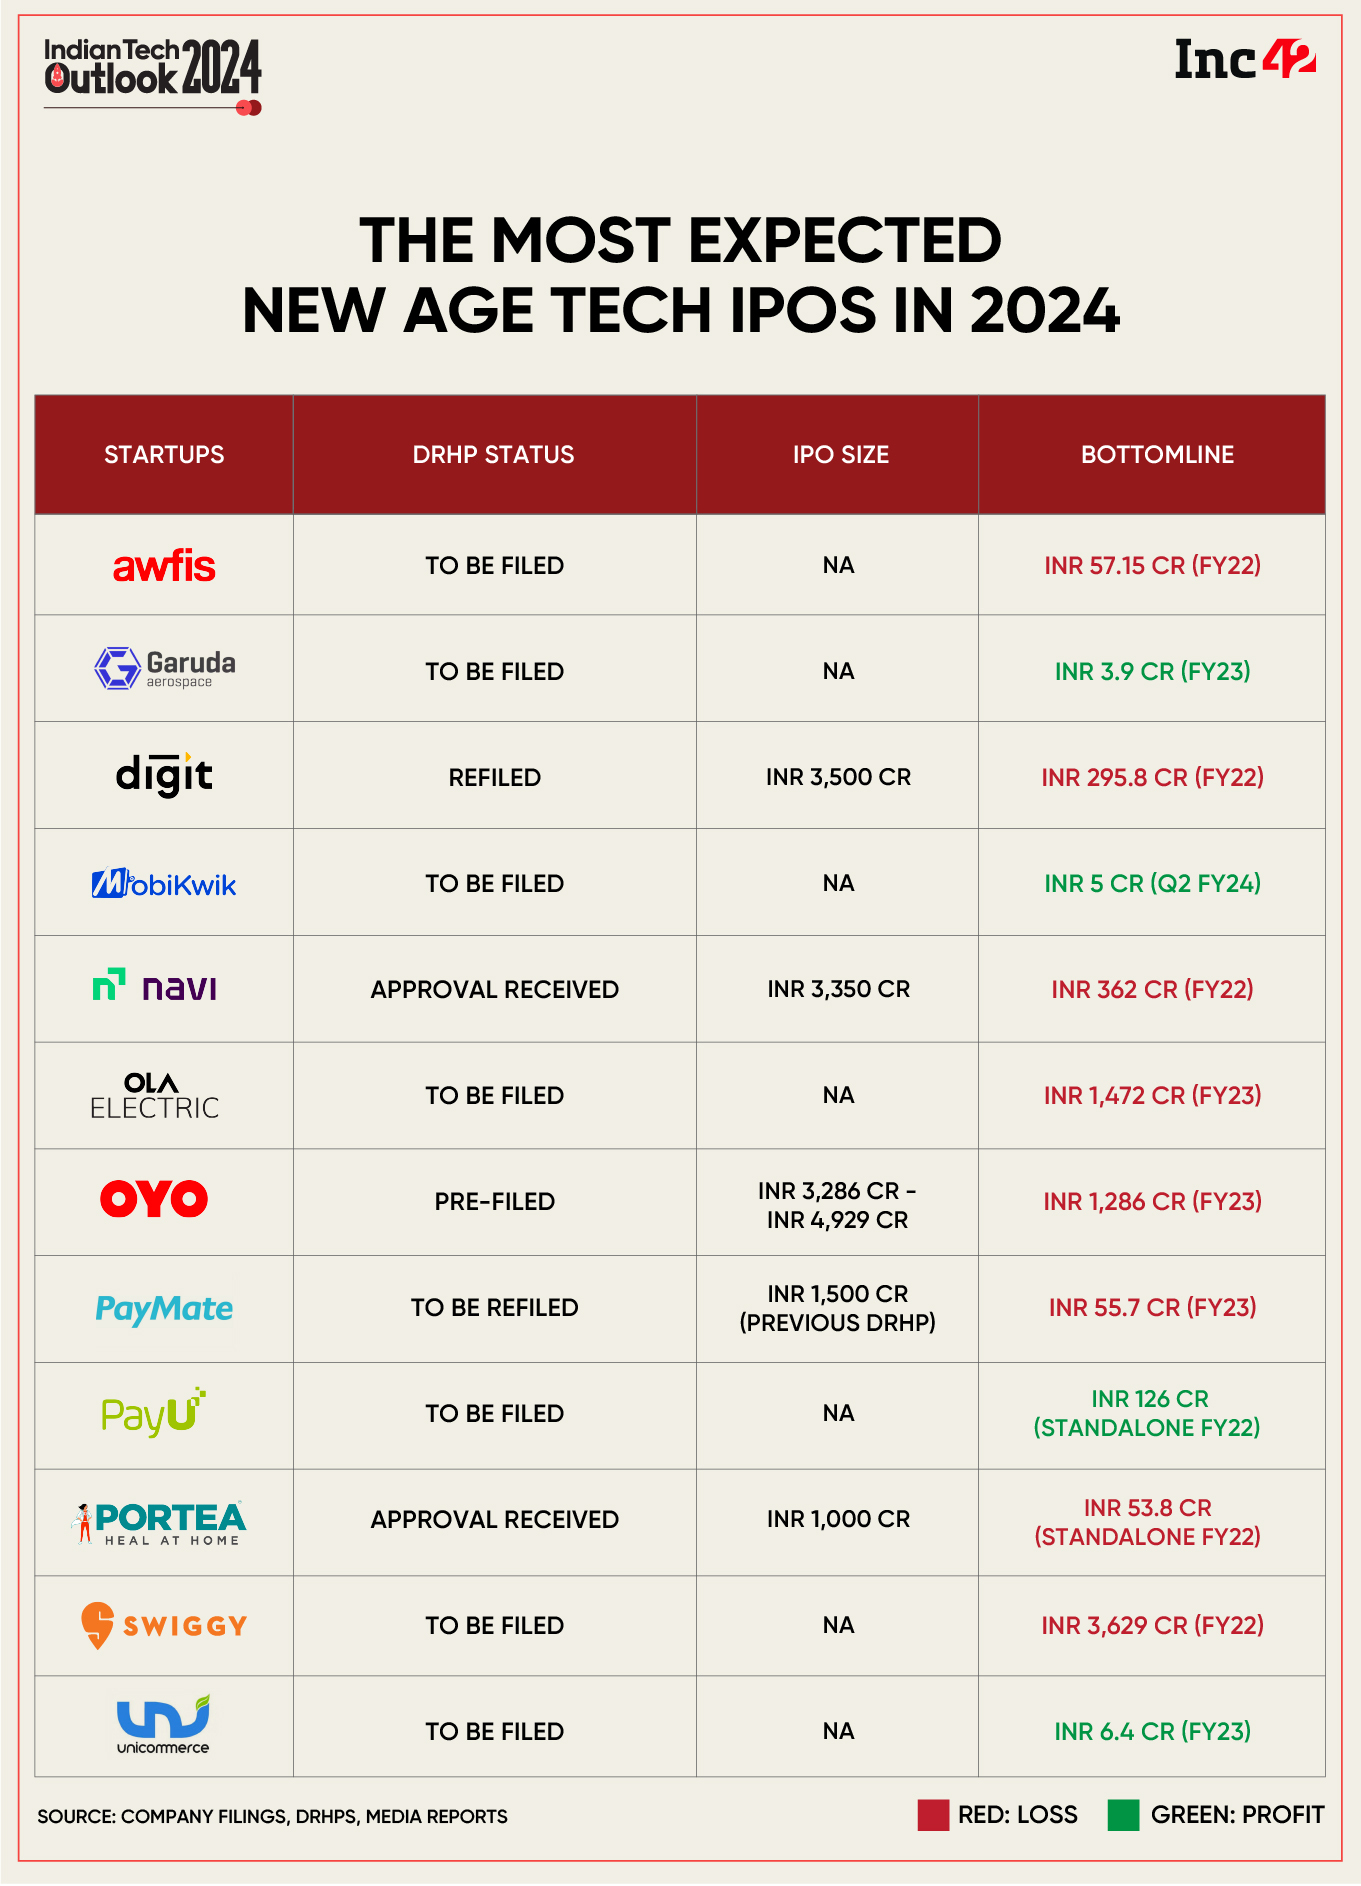 https://inc42.com/wp-content/uploads/2023/12/The-Most-Expected-New-Age-Tech-IPOs-In-2024.jpg